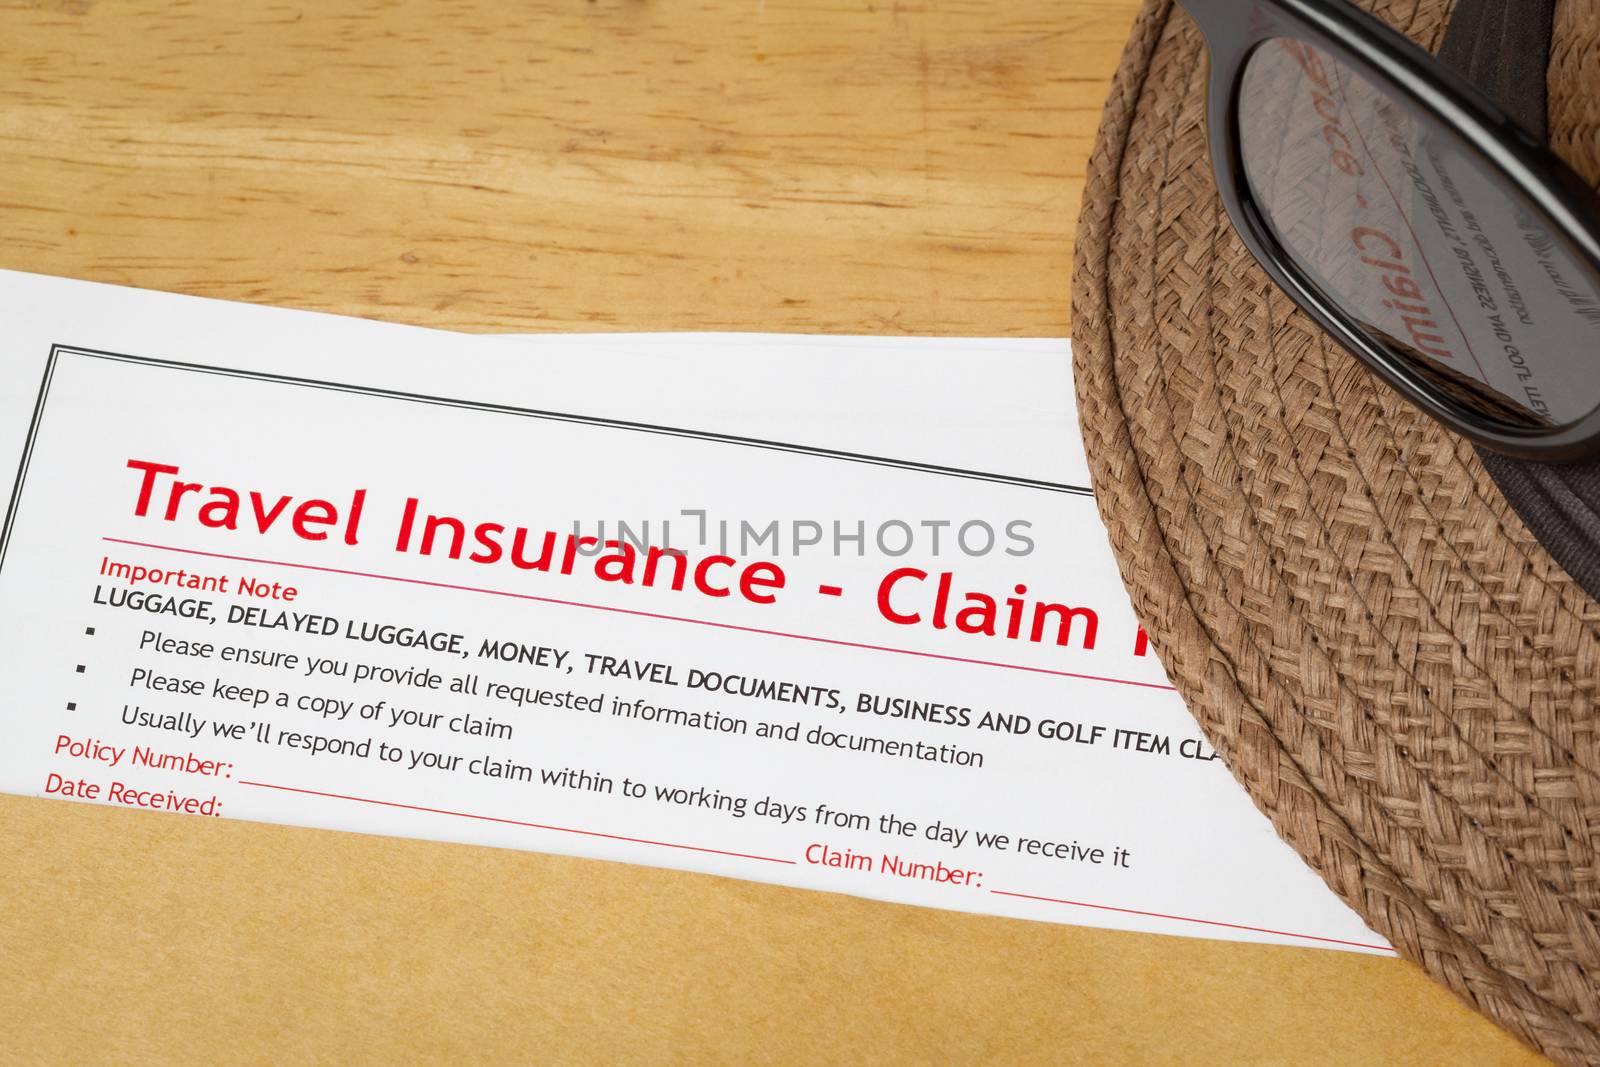 Travel Insurance Claim application form and hat with eyeglass on brown envelope, business insurance and risk concept; document is mock-up